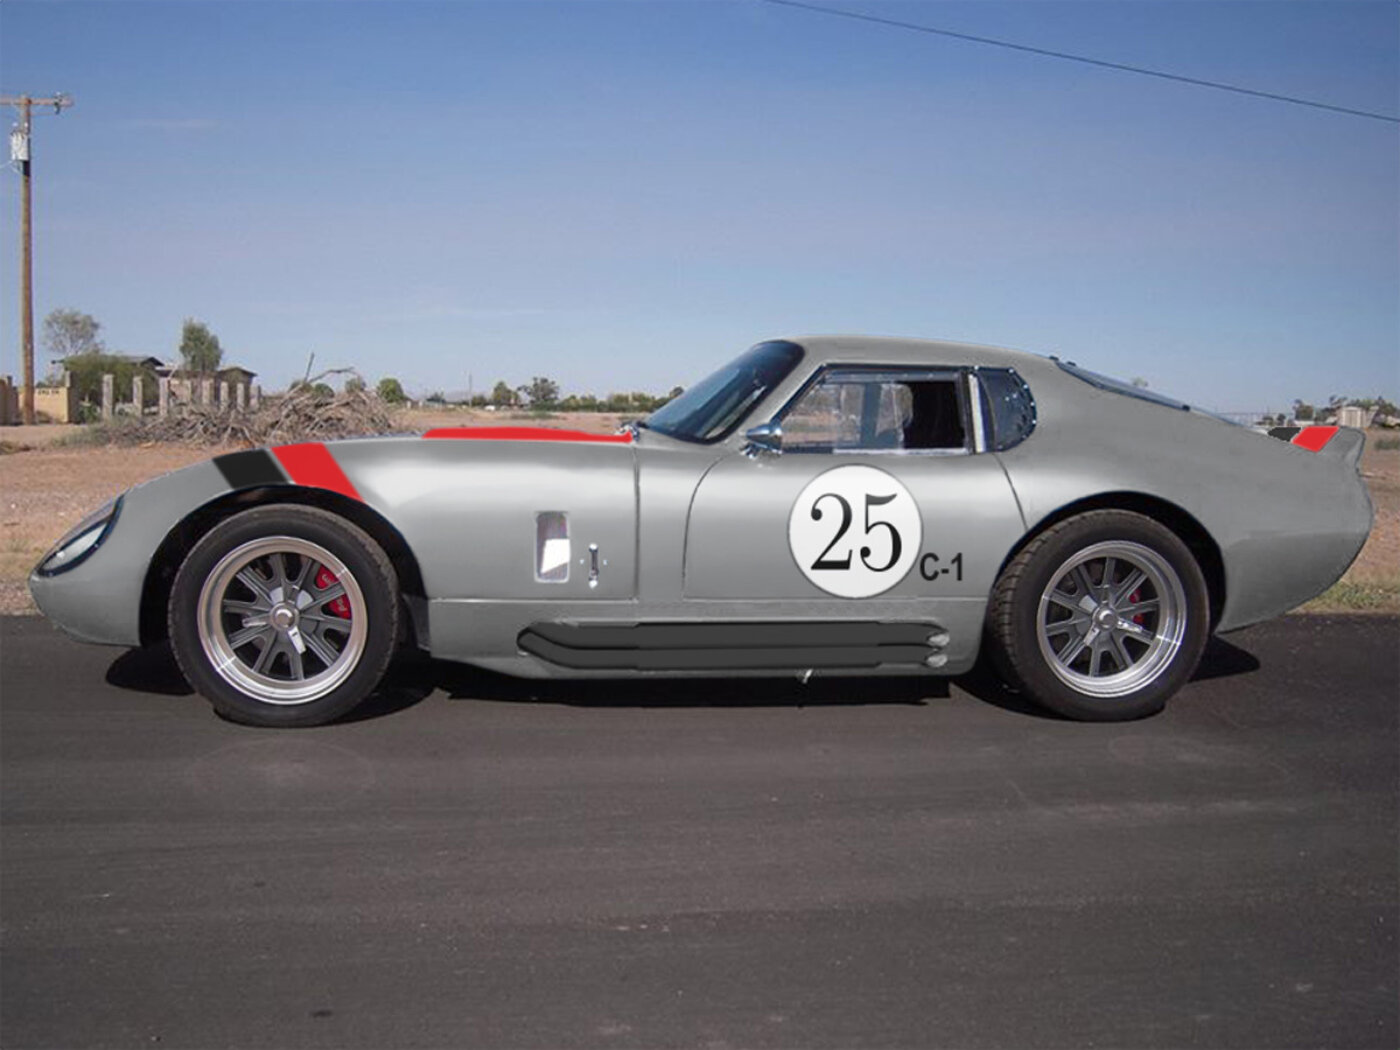 						Levy Racing’S 25Th Anniversary Cobras 1
			